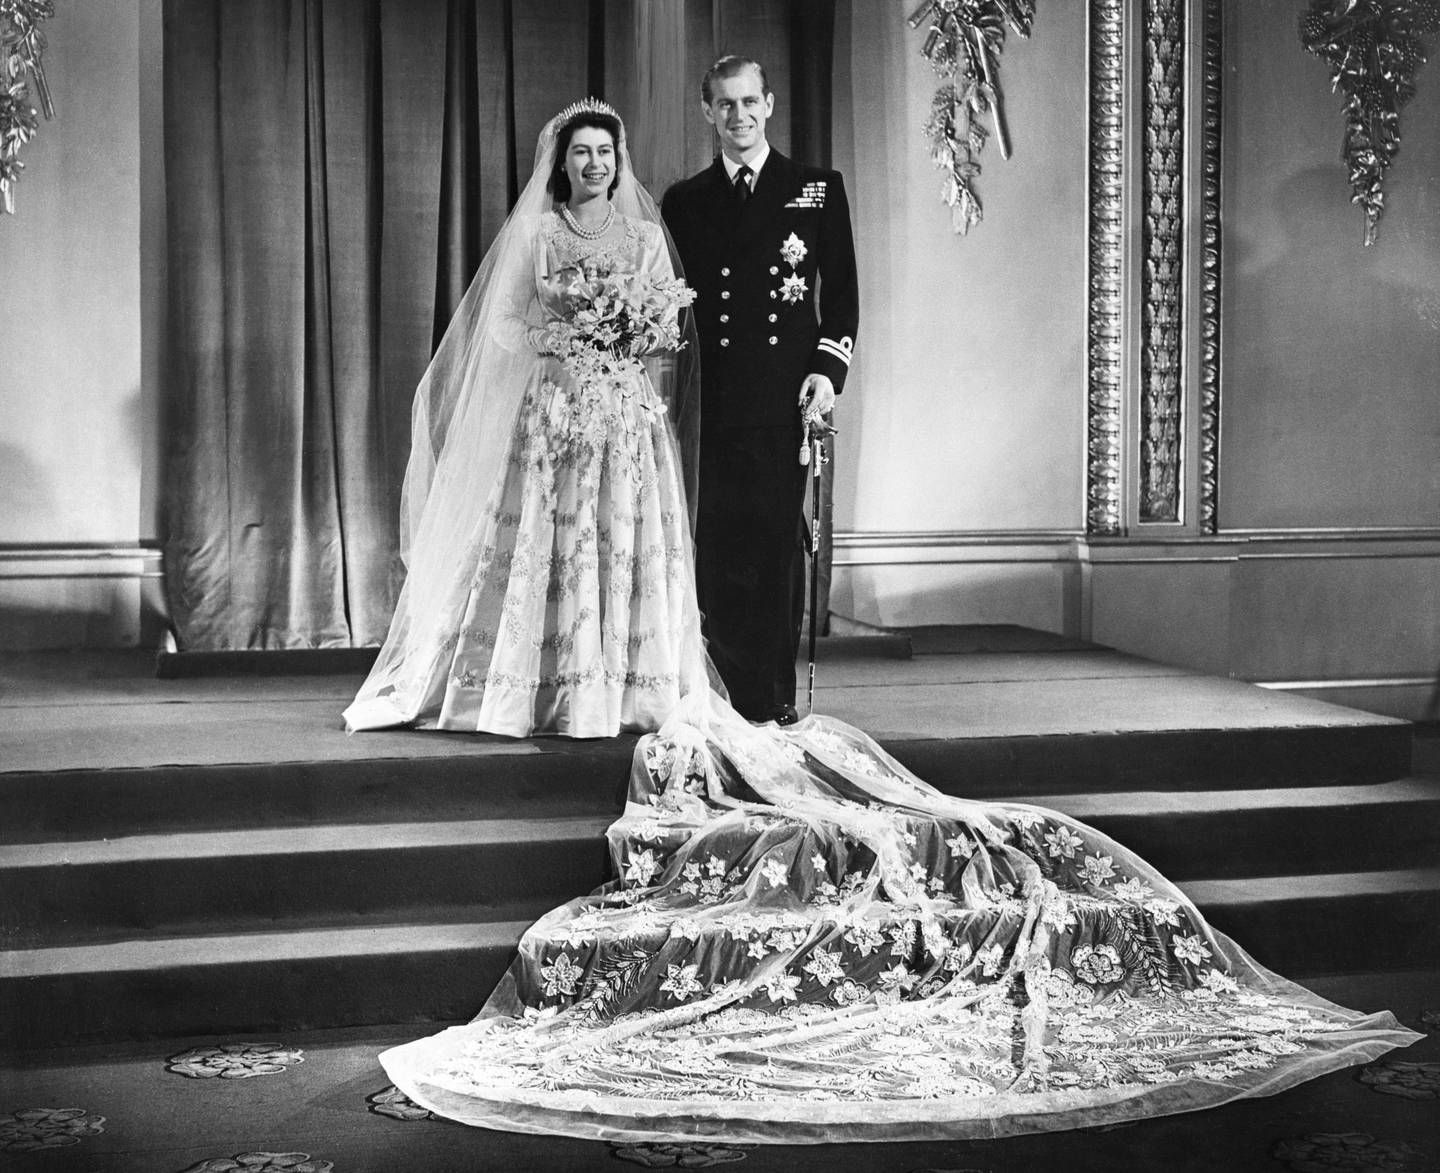 Queen Elizabeth II and Prince Philip on their wedding day in 1947. PA News